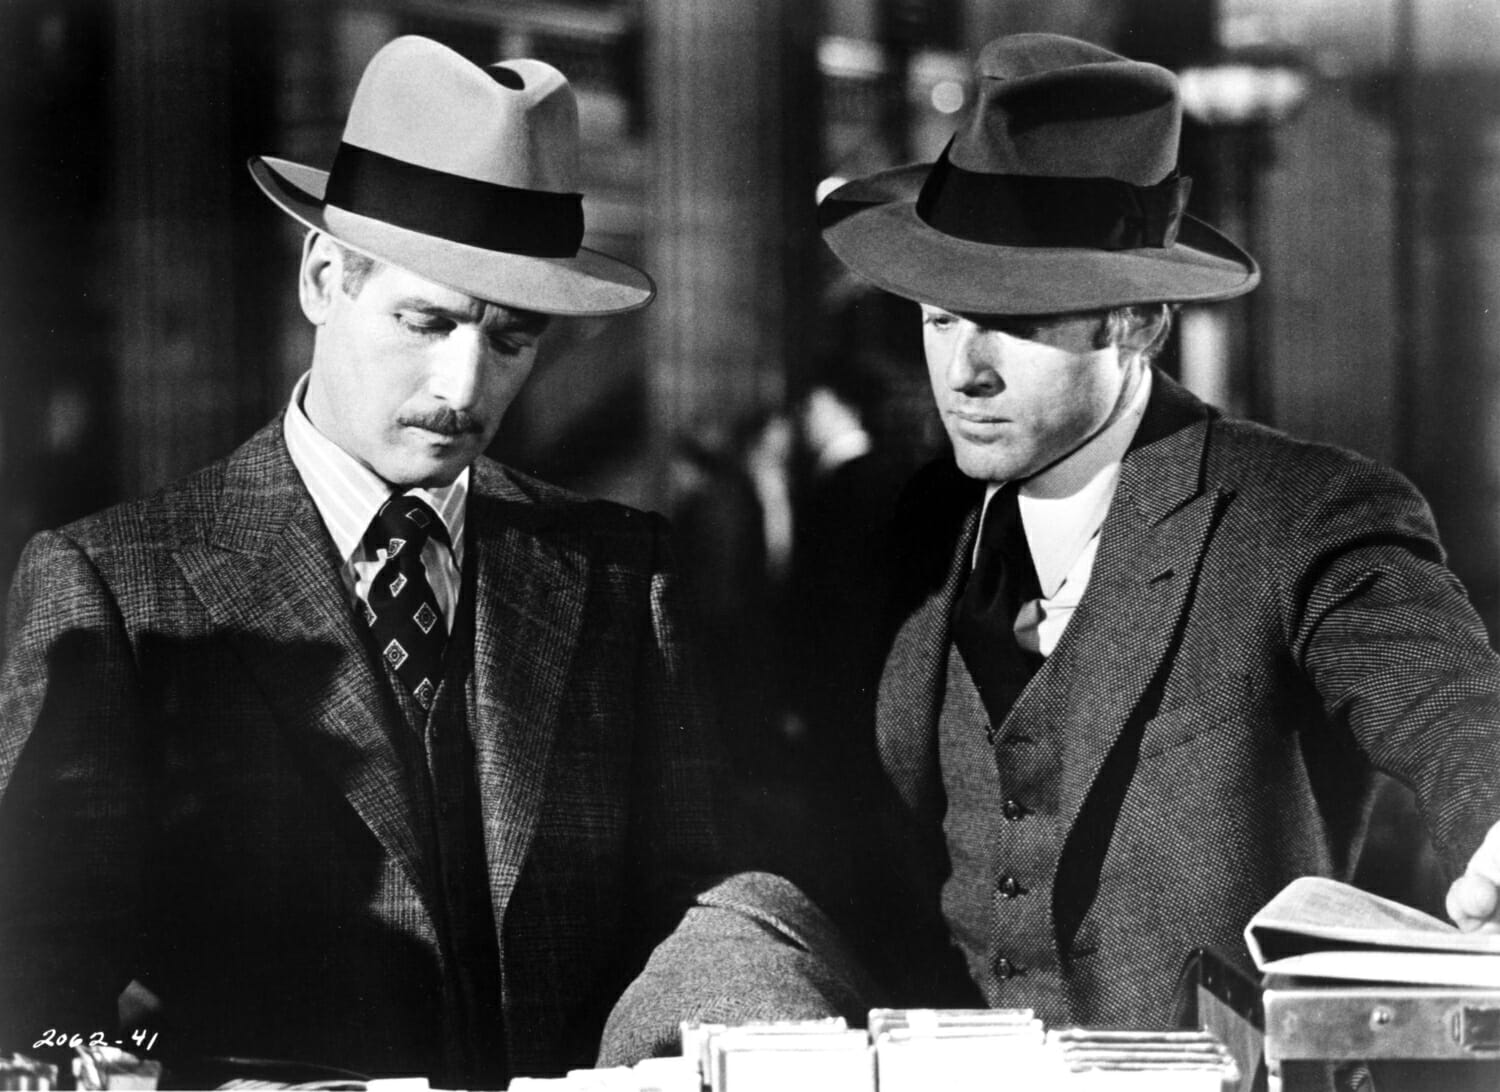 Paul Newman (L) and Robert Redford in 1973's The Sting. Note the 1930's costumes, including fedoras and suits with checks and patterns.